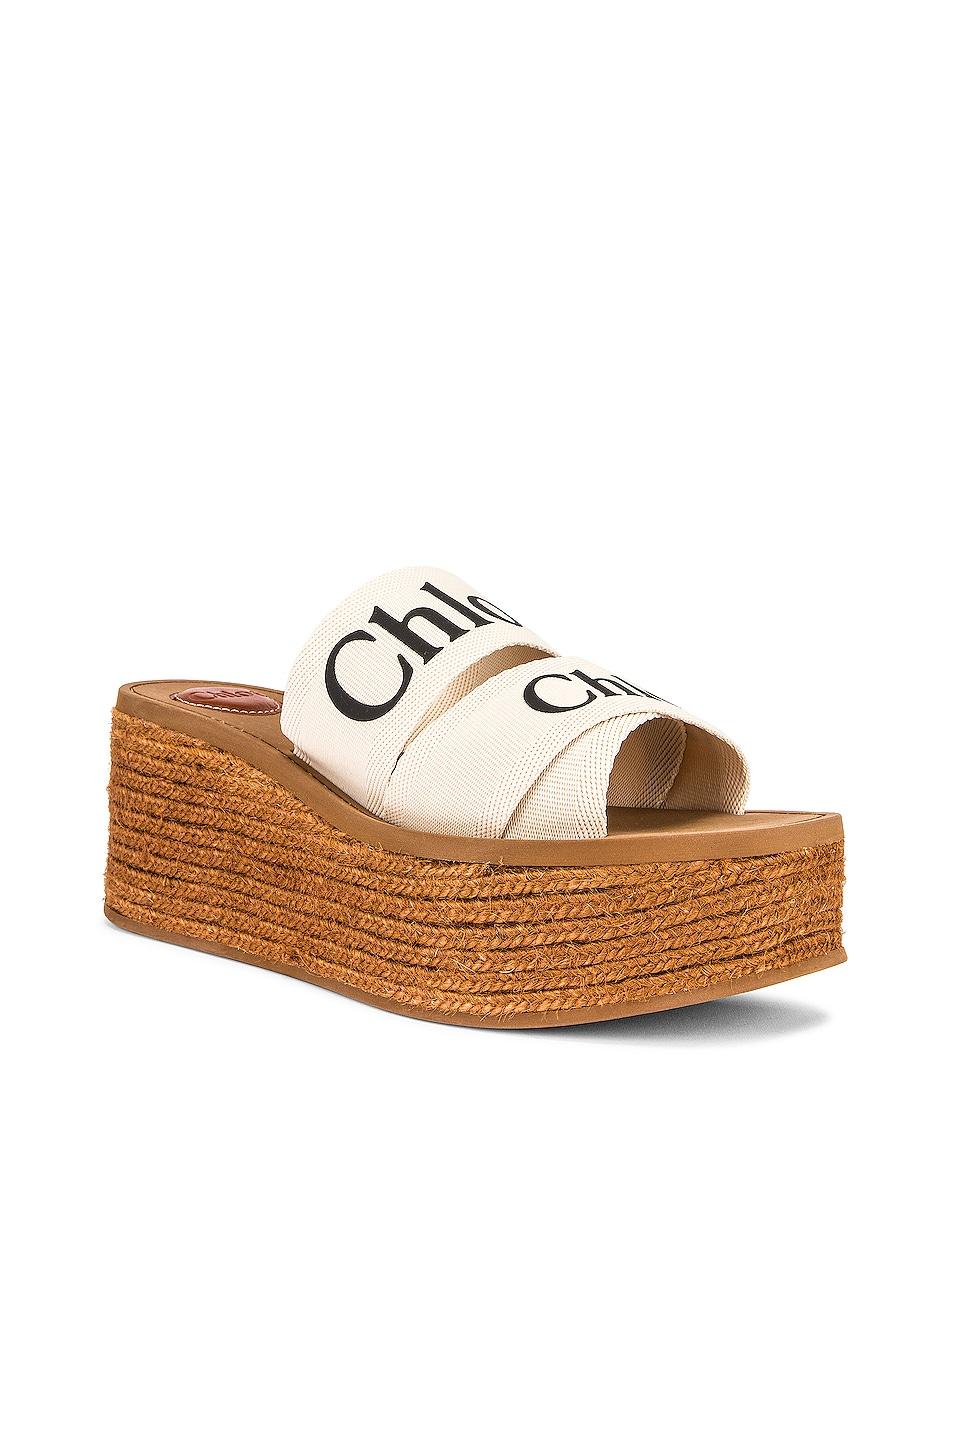 Chloé Woody Canvas Espadrille Mules in White - Lyst